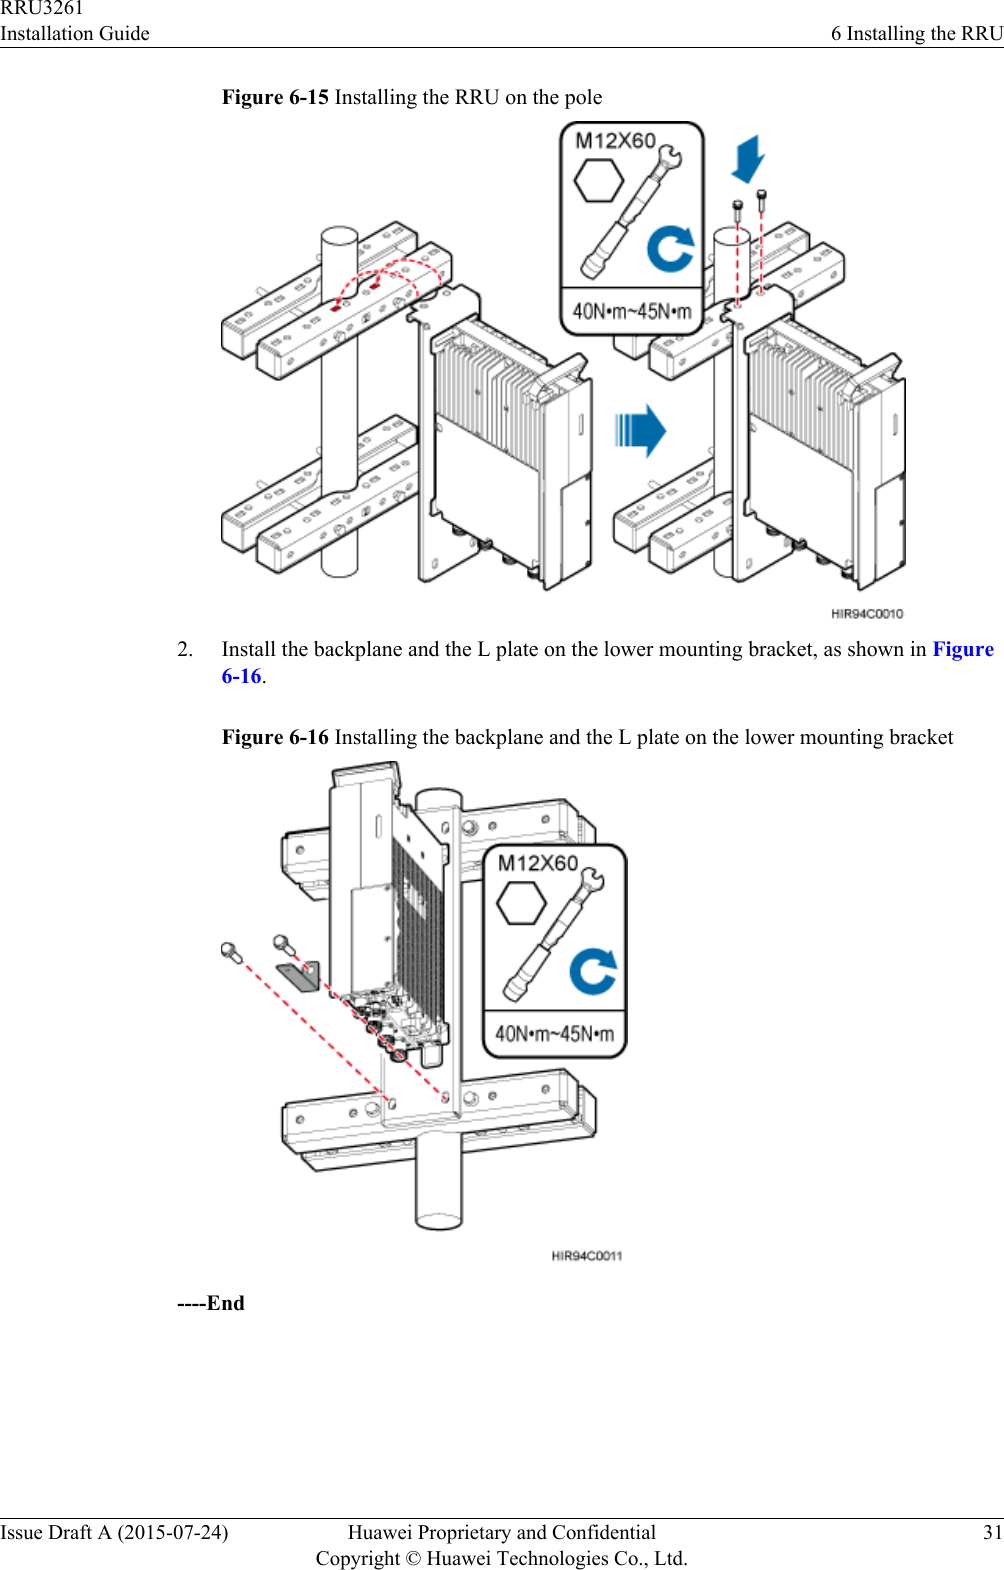 Figure 6-15 Installing the RRU on the pole2. Install the backplane and the L plate on the lower mounting bracket, as shown in Figure6-16.Figure 6-16 Installing the backplane and the L plate on the lower mounting bracket----EndRRU3261Installation Guide 6 Installing the RRUIssue Draft A (2015-07-24) Huawei Proprietary and ConfidentialCopyright © Huawei Technologies Co., Ltd.31